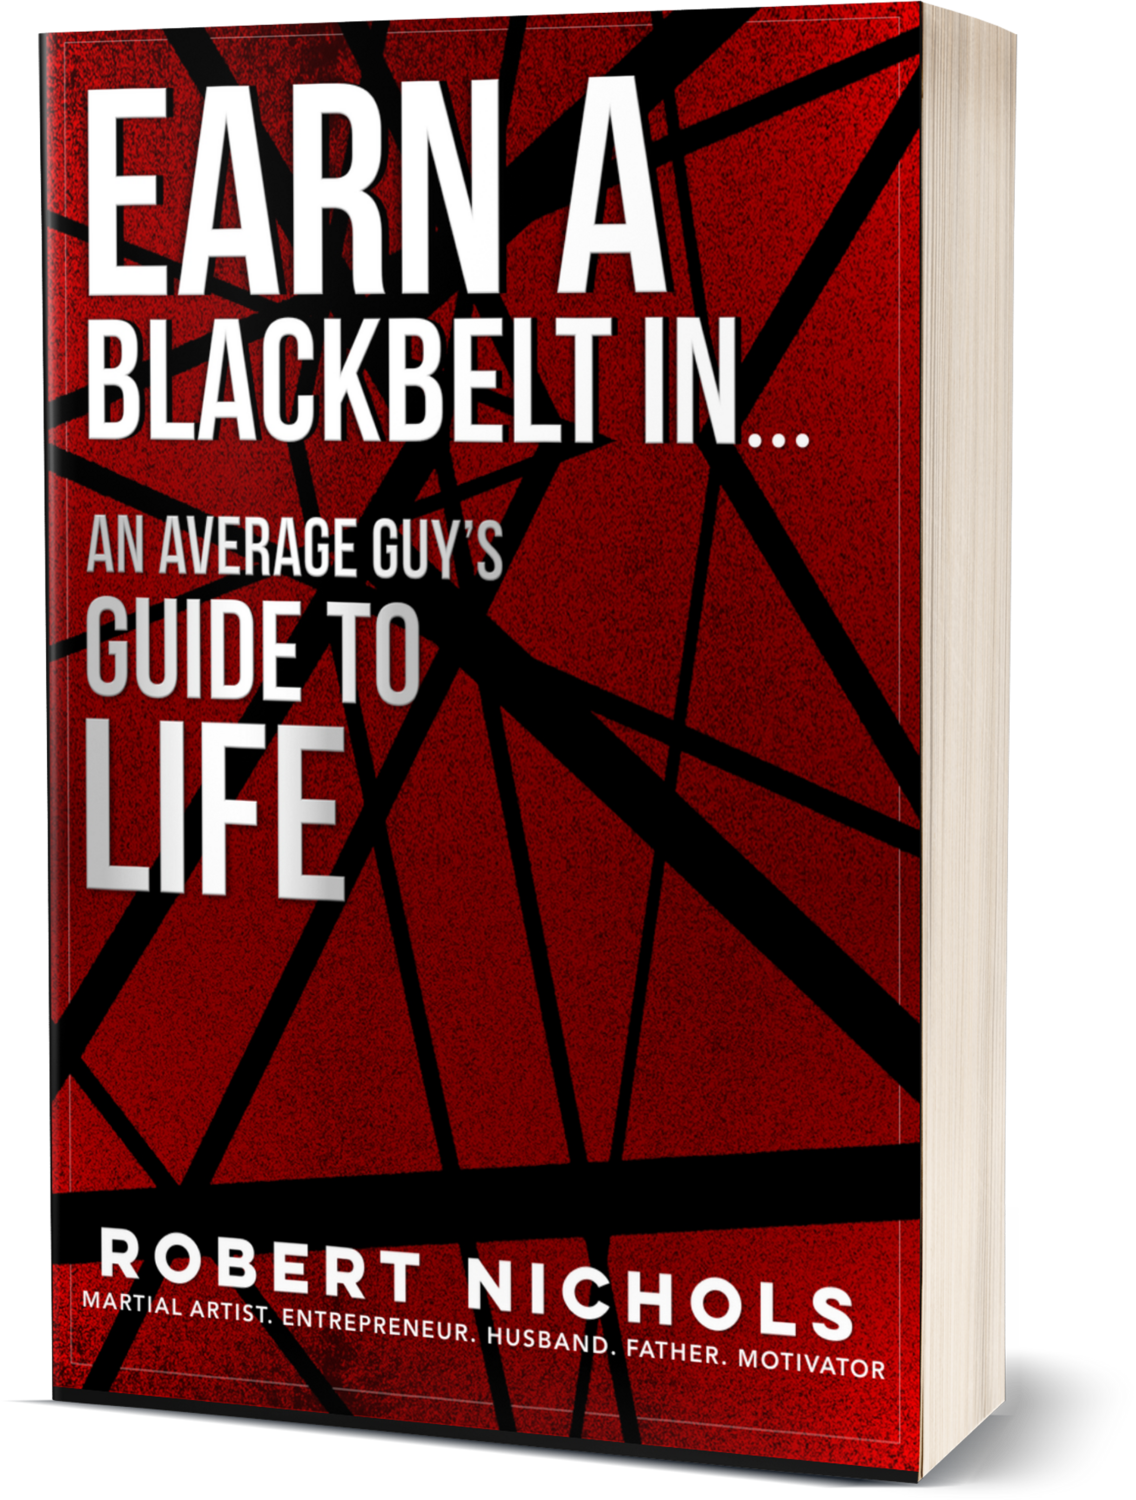 Earn A Blackbelt In...An Average Guy's Guide to Life Book